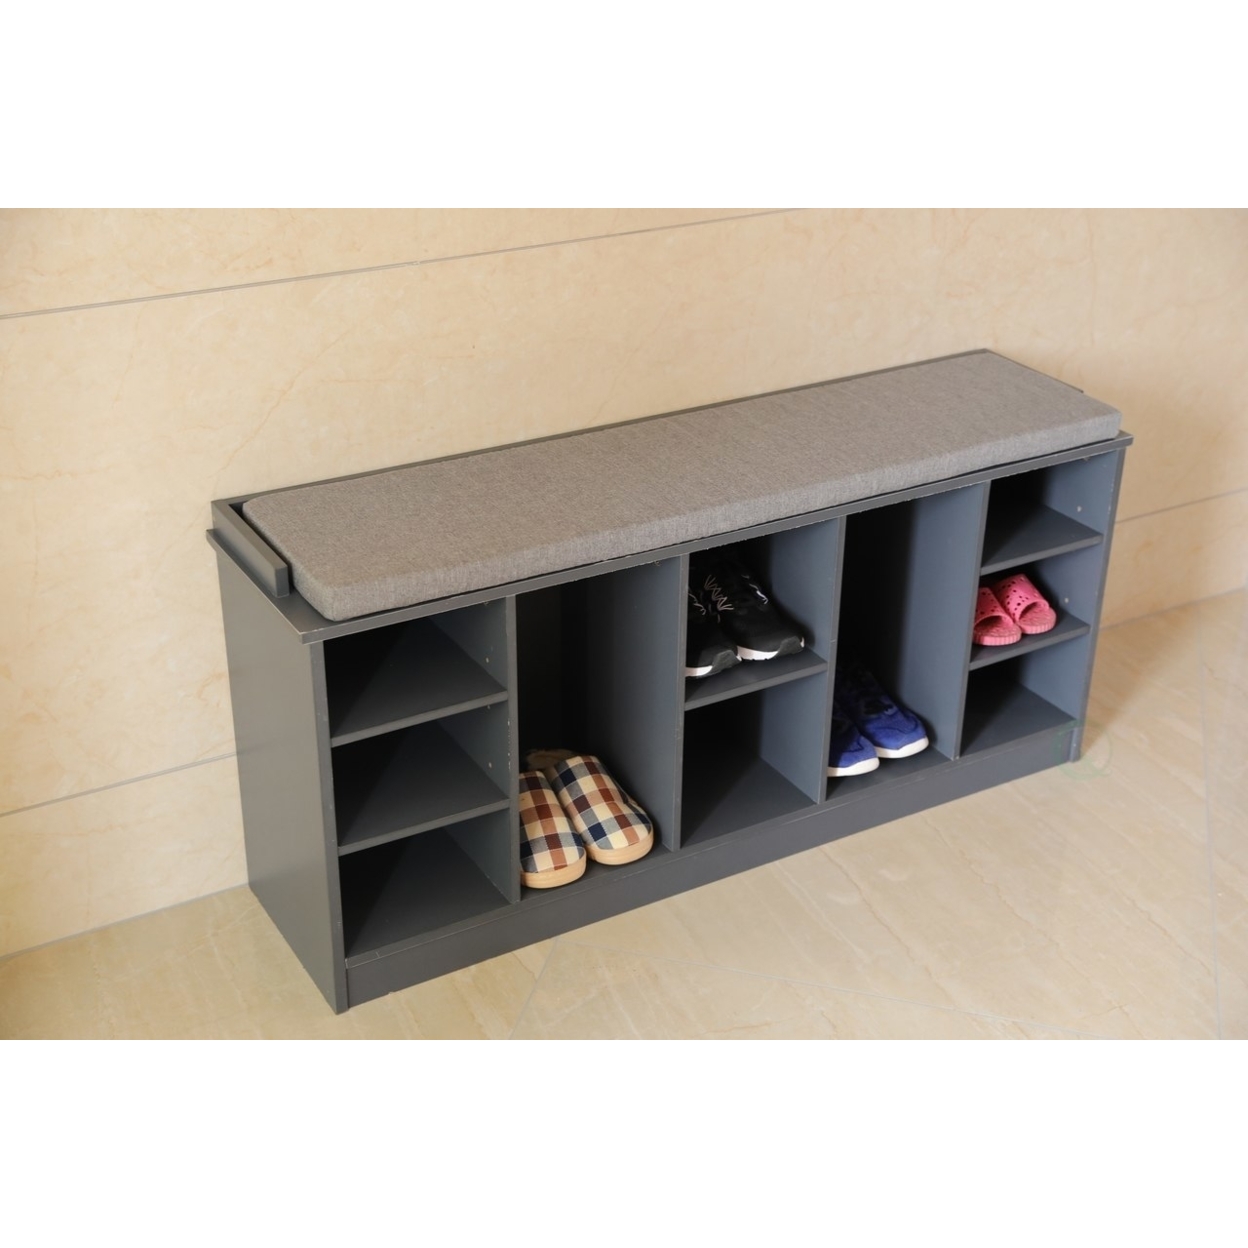 Wooden Shoe Cubicle Storage Entryway Bench With Soft Cushion For Seating